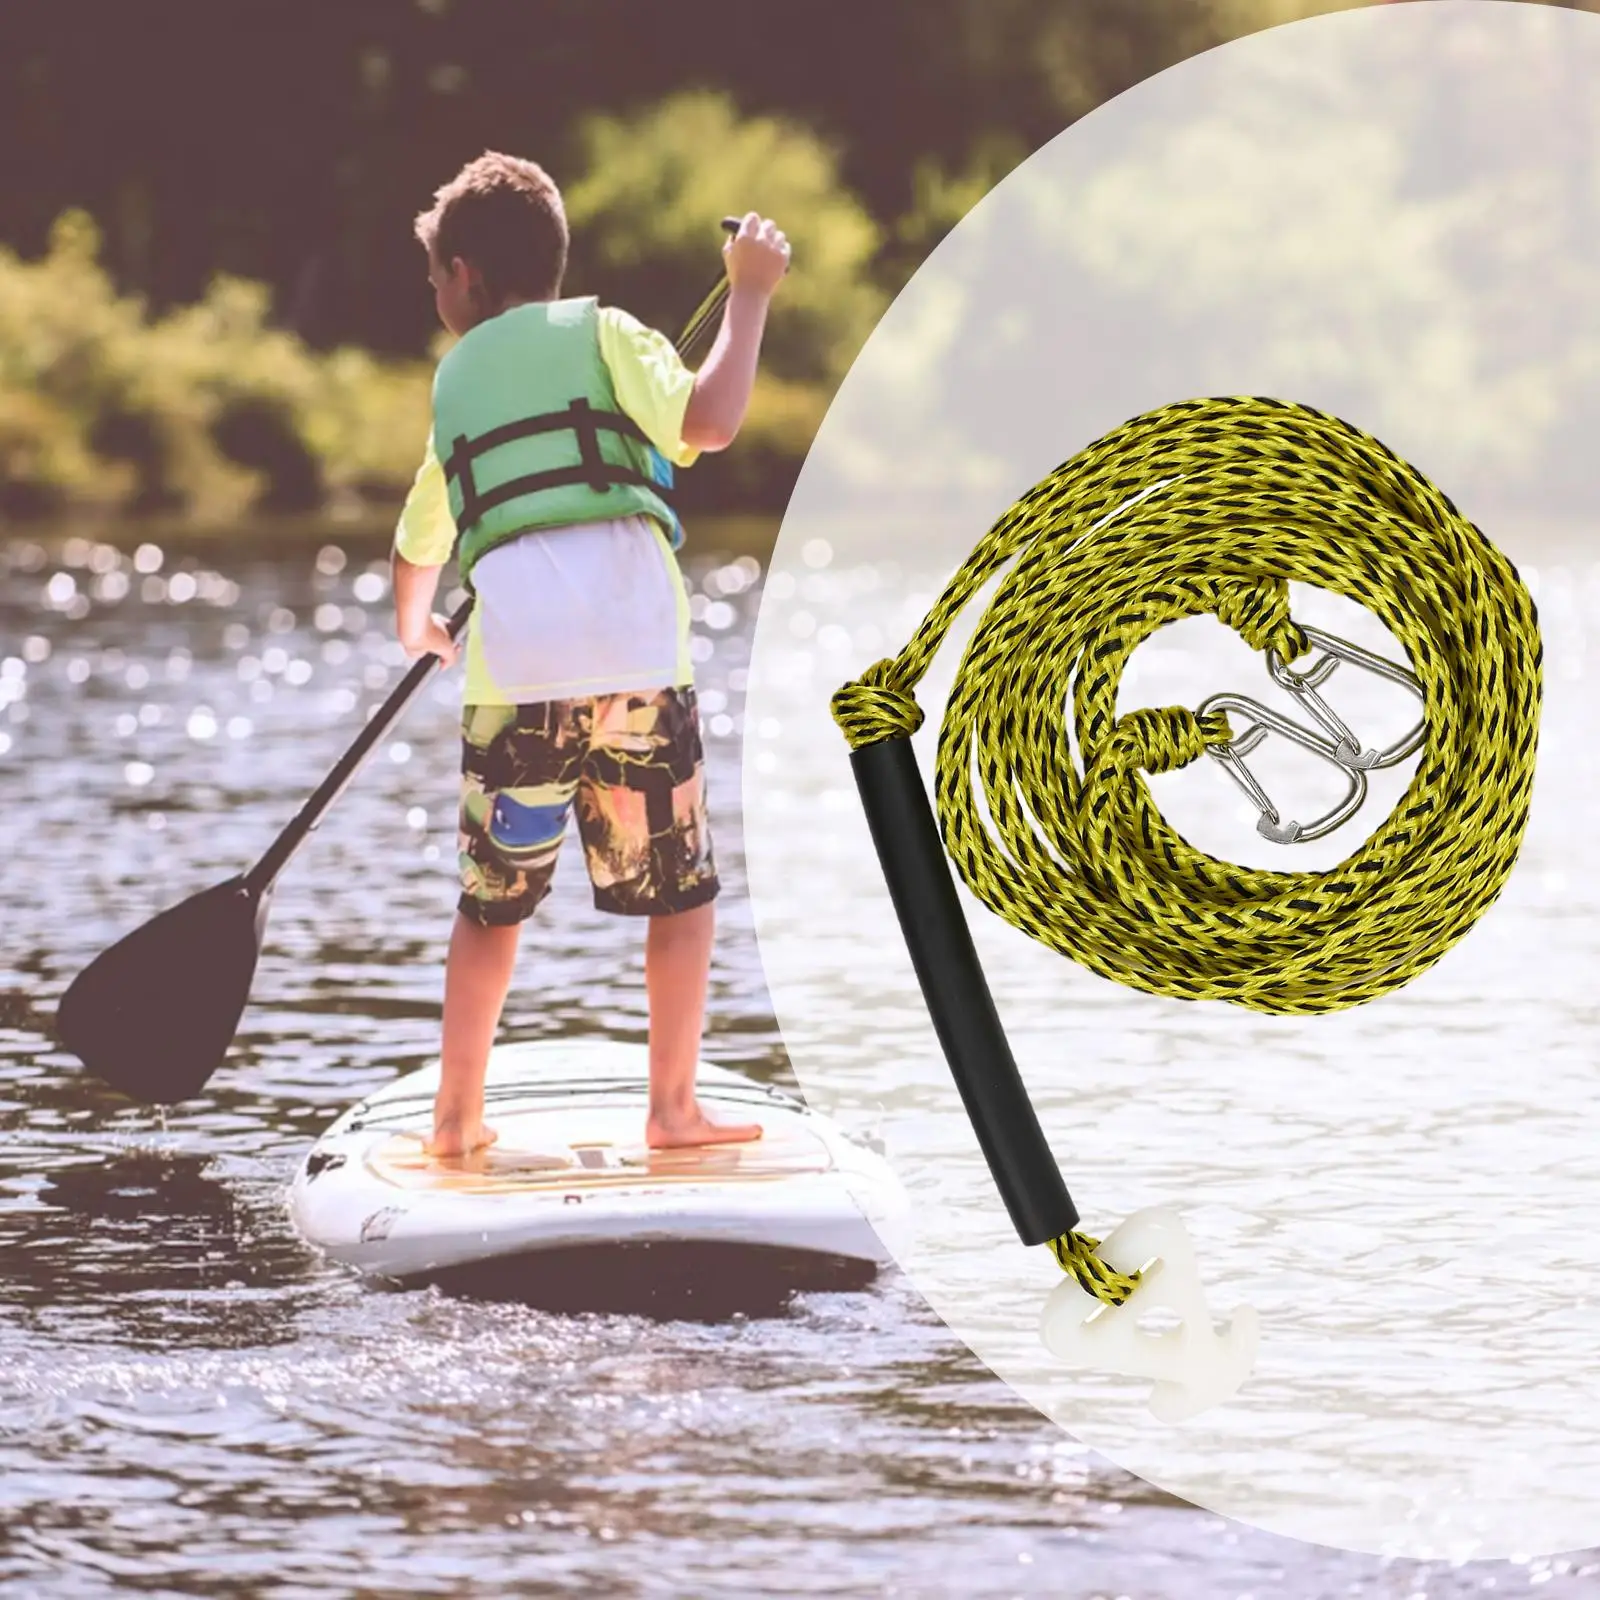 Pulley Tow Harness Watersports Rope 17ft Waakeboarding Tubing Wake Boarding Water Ski Waterskiing Tow Harness Quick Connector